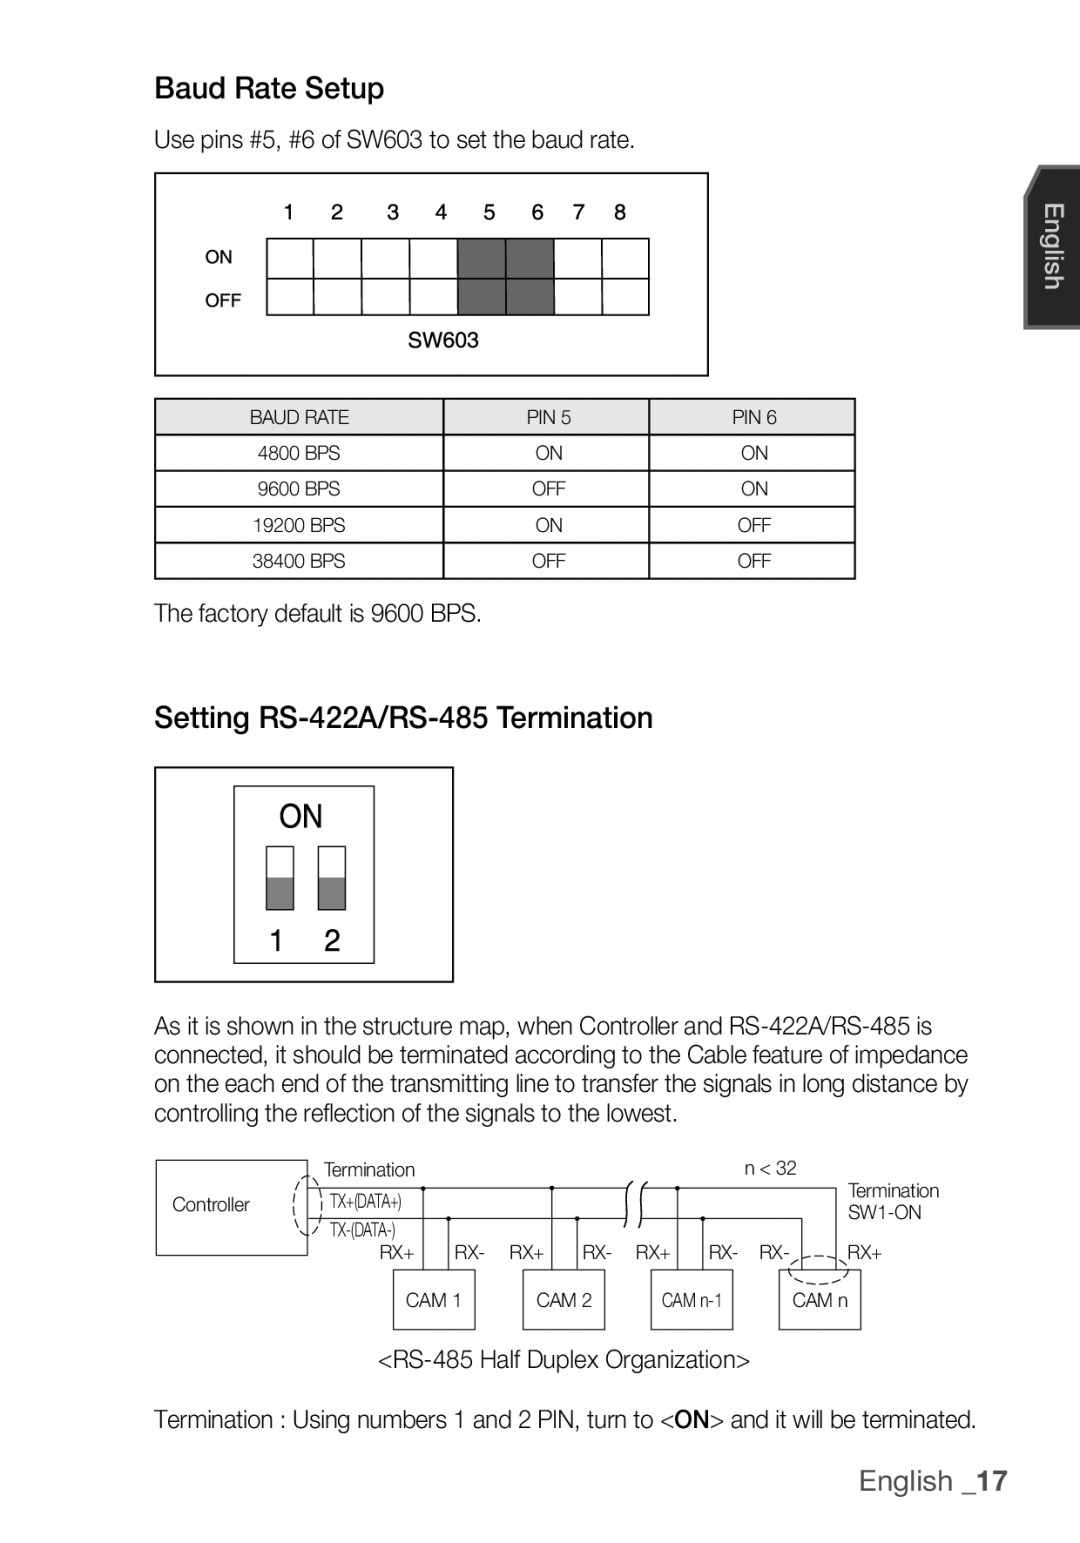 Samsung SCC-C7455P Baud Rate Setup, Setting RS-422A/RS-485 Termination, Use pins #5, #6 of SW603 to set the baud rate 